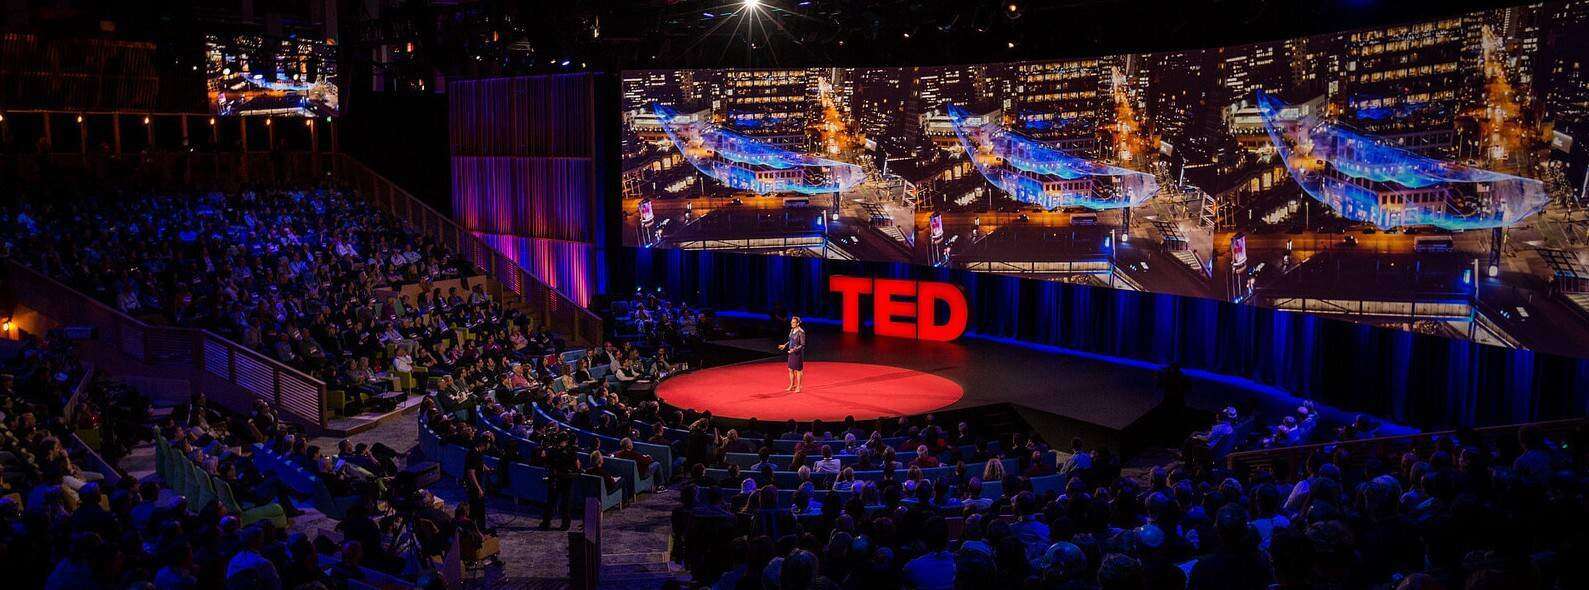 TED style talk